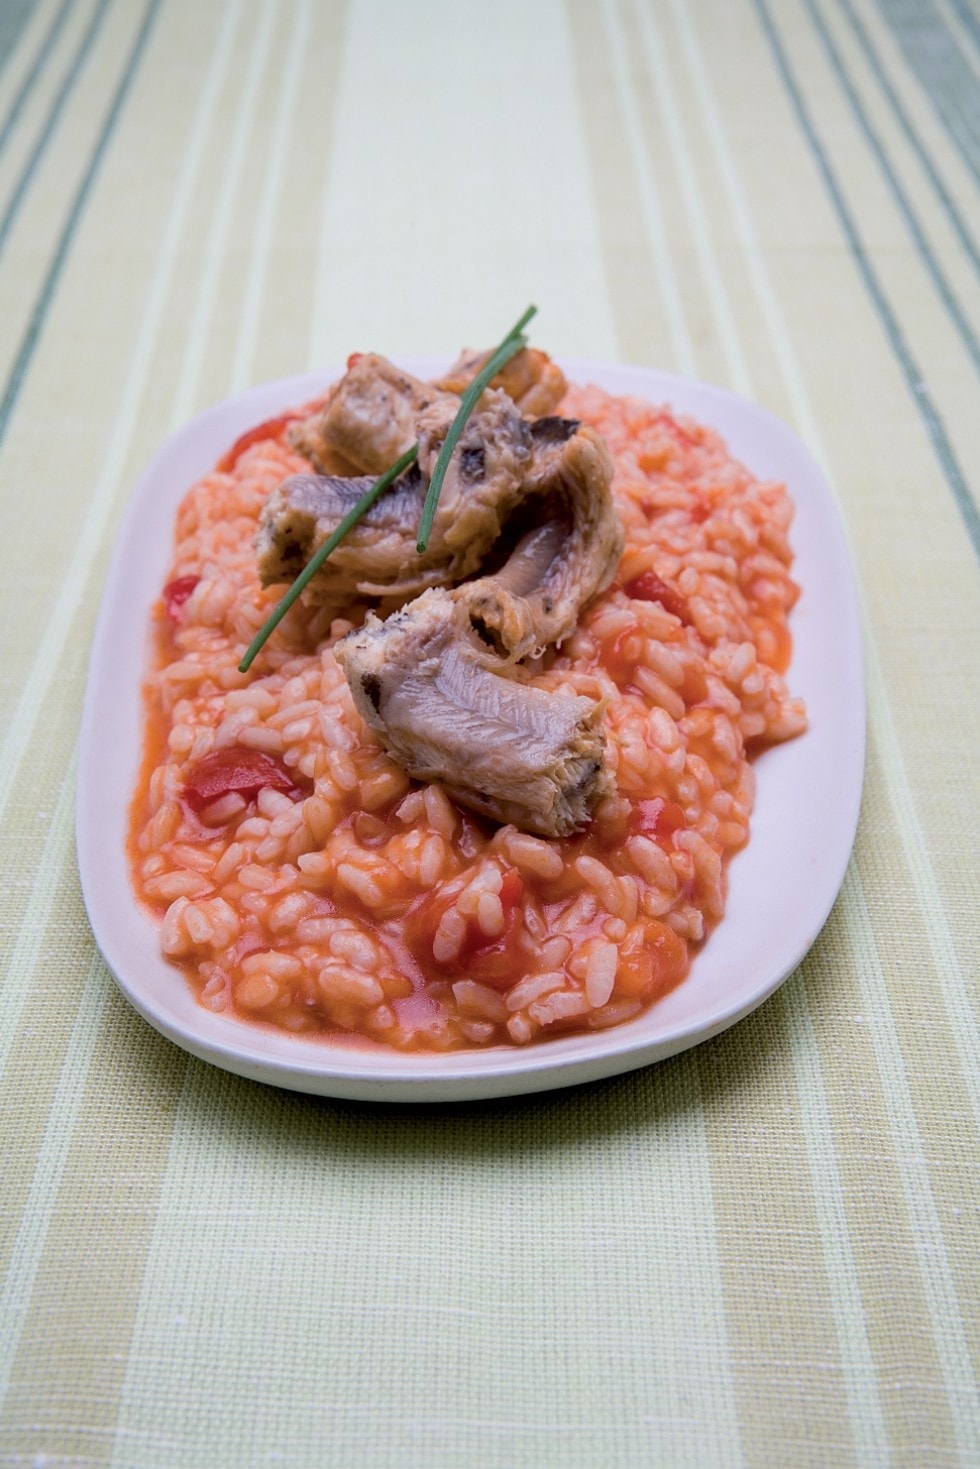 Risotto with eel might sound like a strange recipe, but it's worth trying.